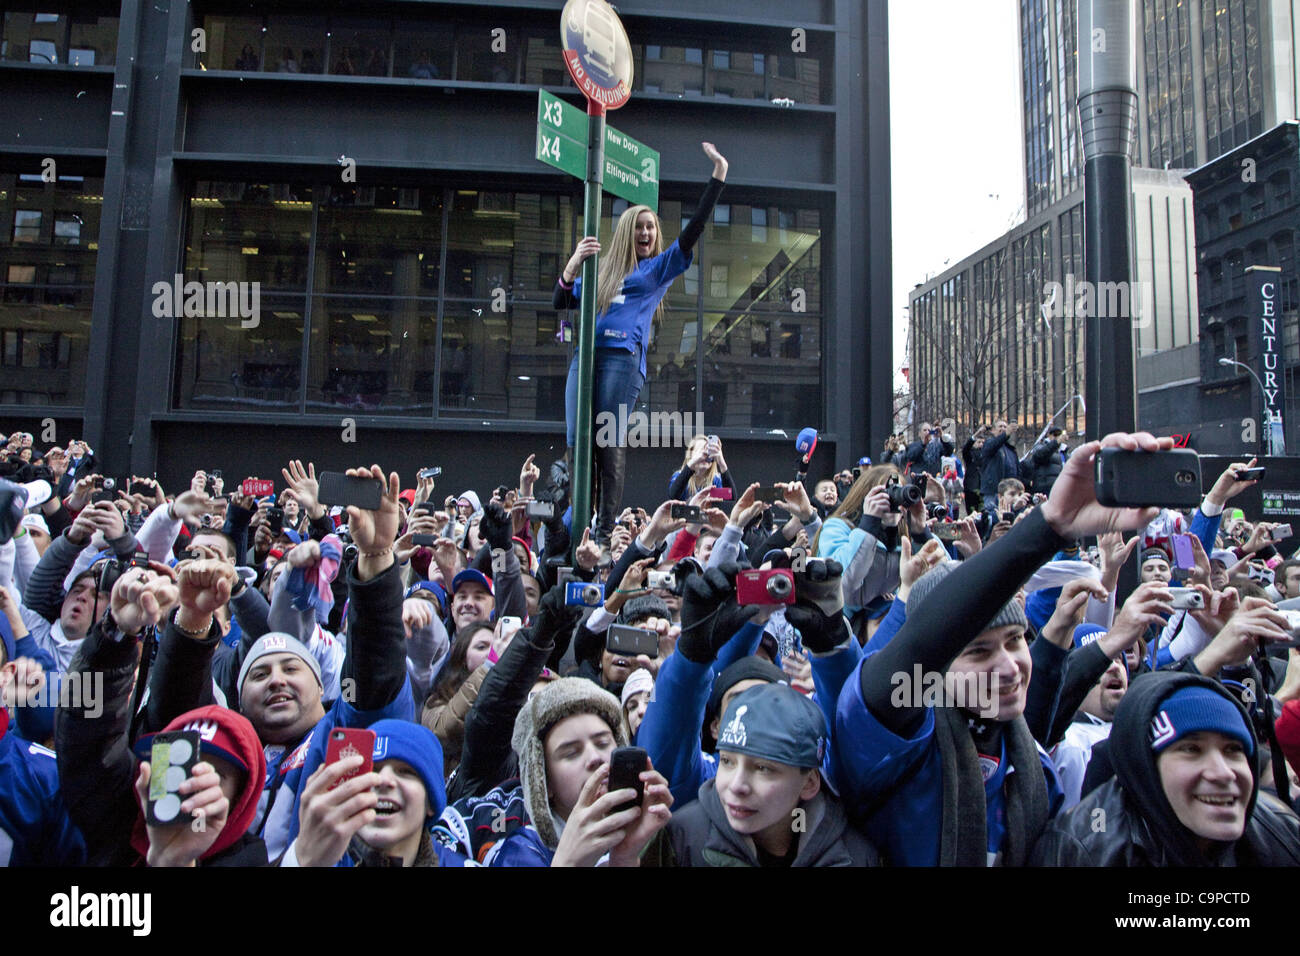 Feb. 7, 2012 - New York, New York, U.S - During the Superbowl Champion Parade fans cheer their winning team the New York Giants riding up Broadway Ave. in Lower Manhattan. (Credit Image: © Gary Dwight Miller/ZUMAPRESS.com) Stock Photo